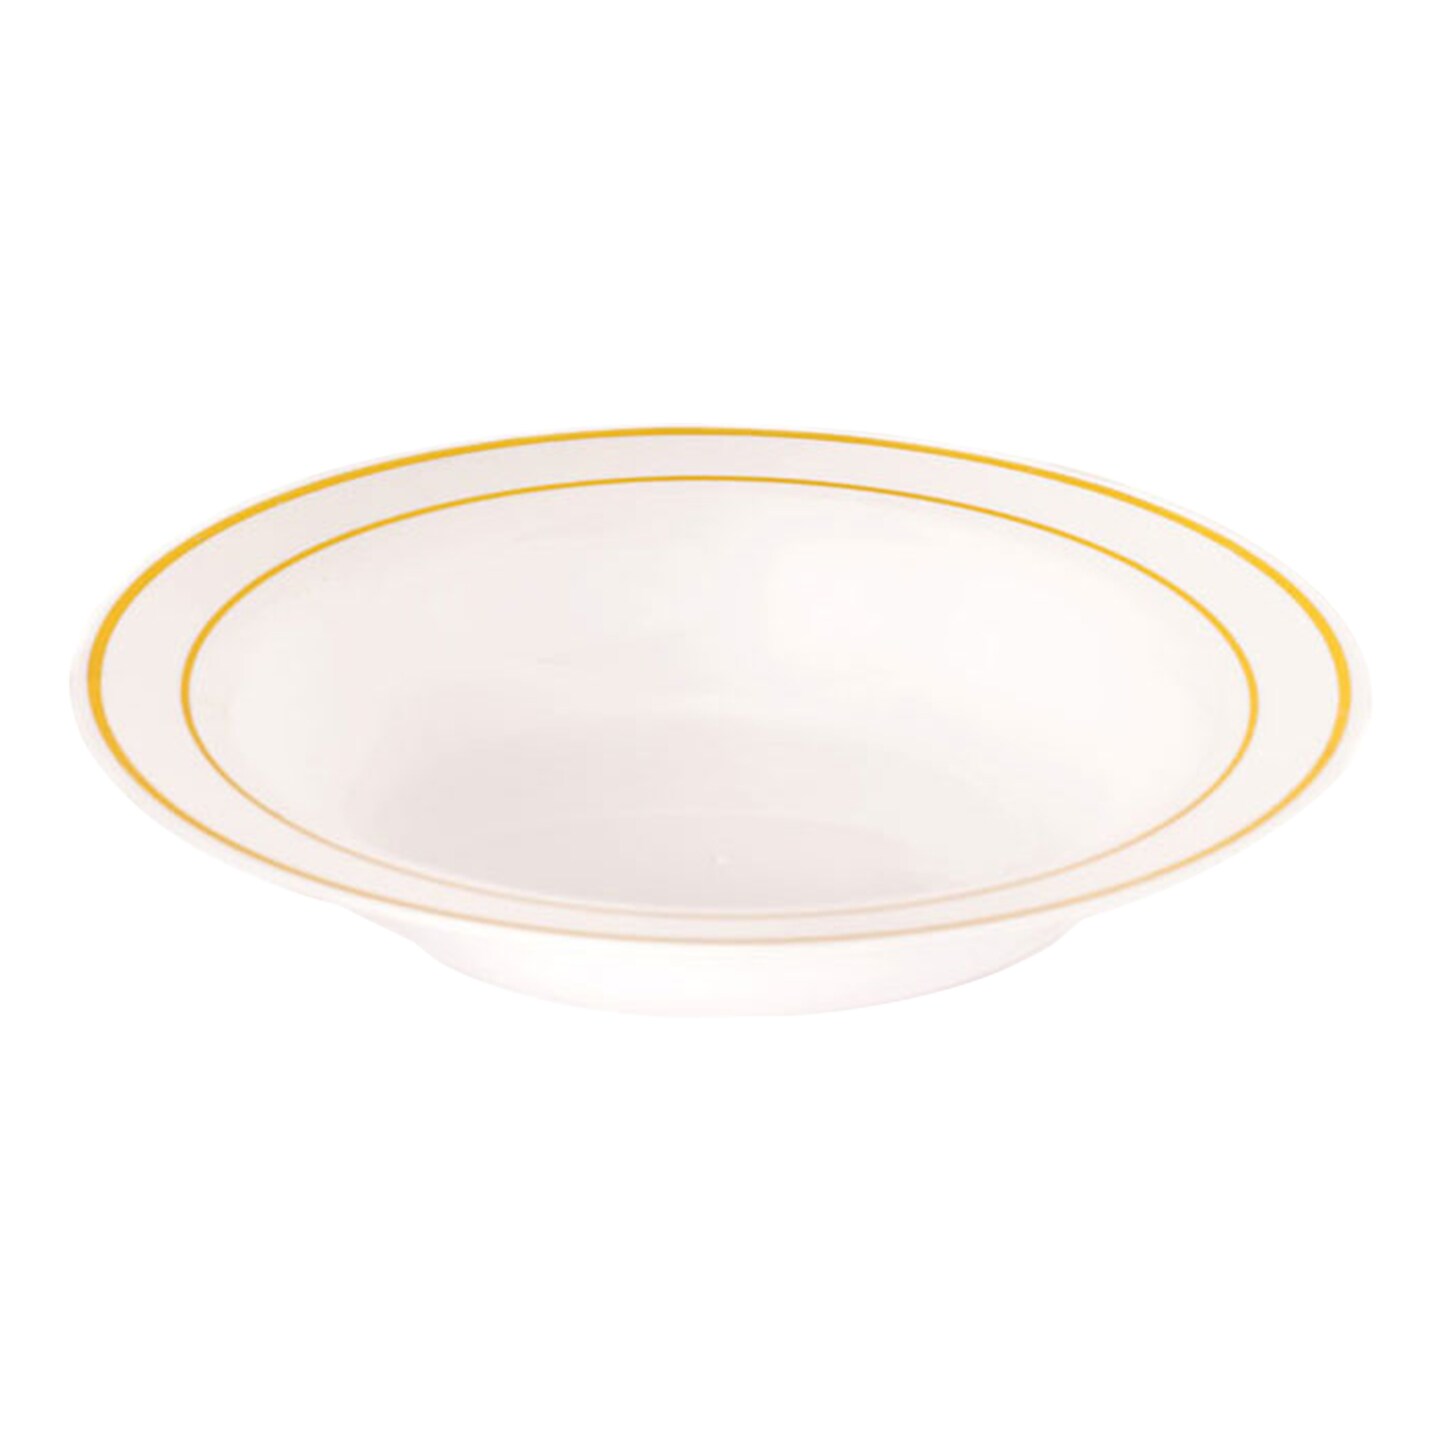 White with Gold Edge Rim Round Disposable Plastic Dessert Bowls -5 Ounce (120 Bowls)